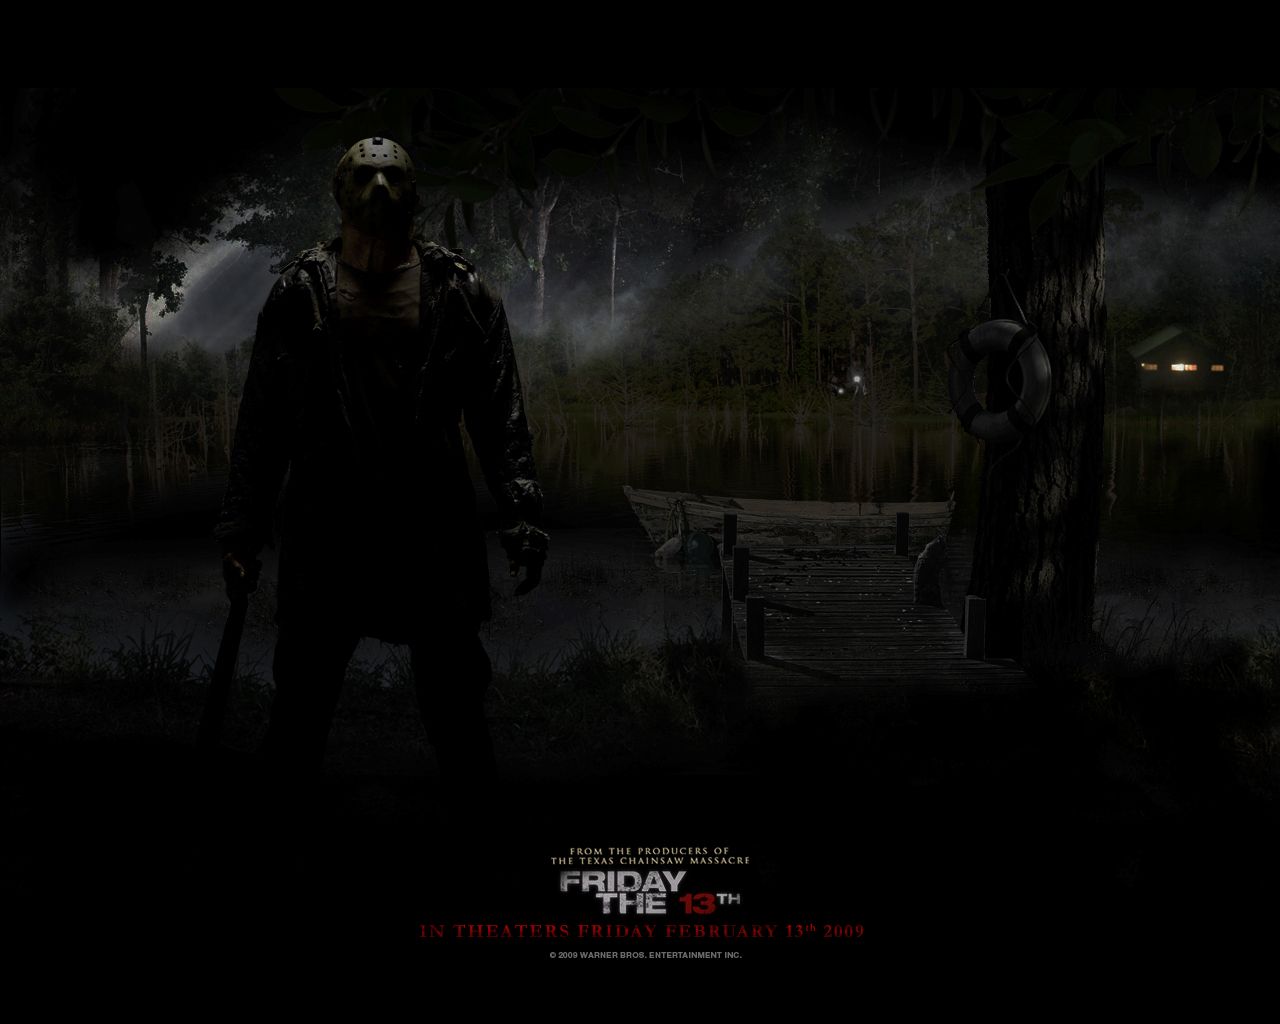 Friday the 13th Wallpaper for Desktop. Friday the 13th Wallpaper, Friday the 13th Wallpaper Jenna and FB Friday the 13th Wallpaper